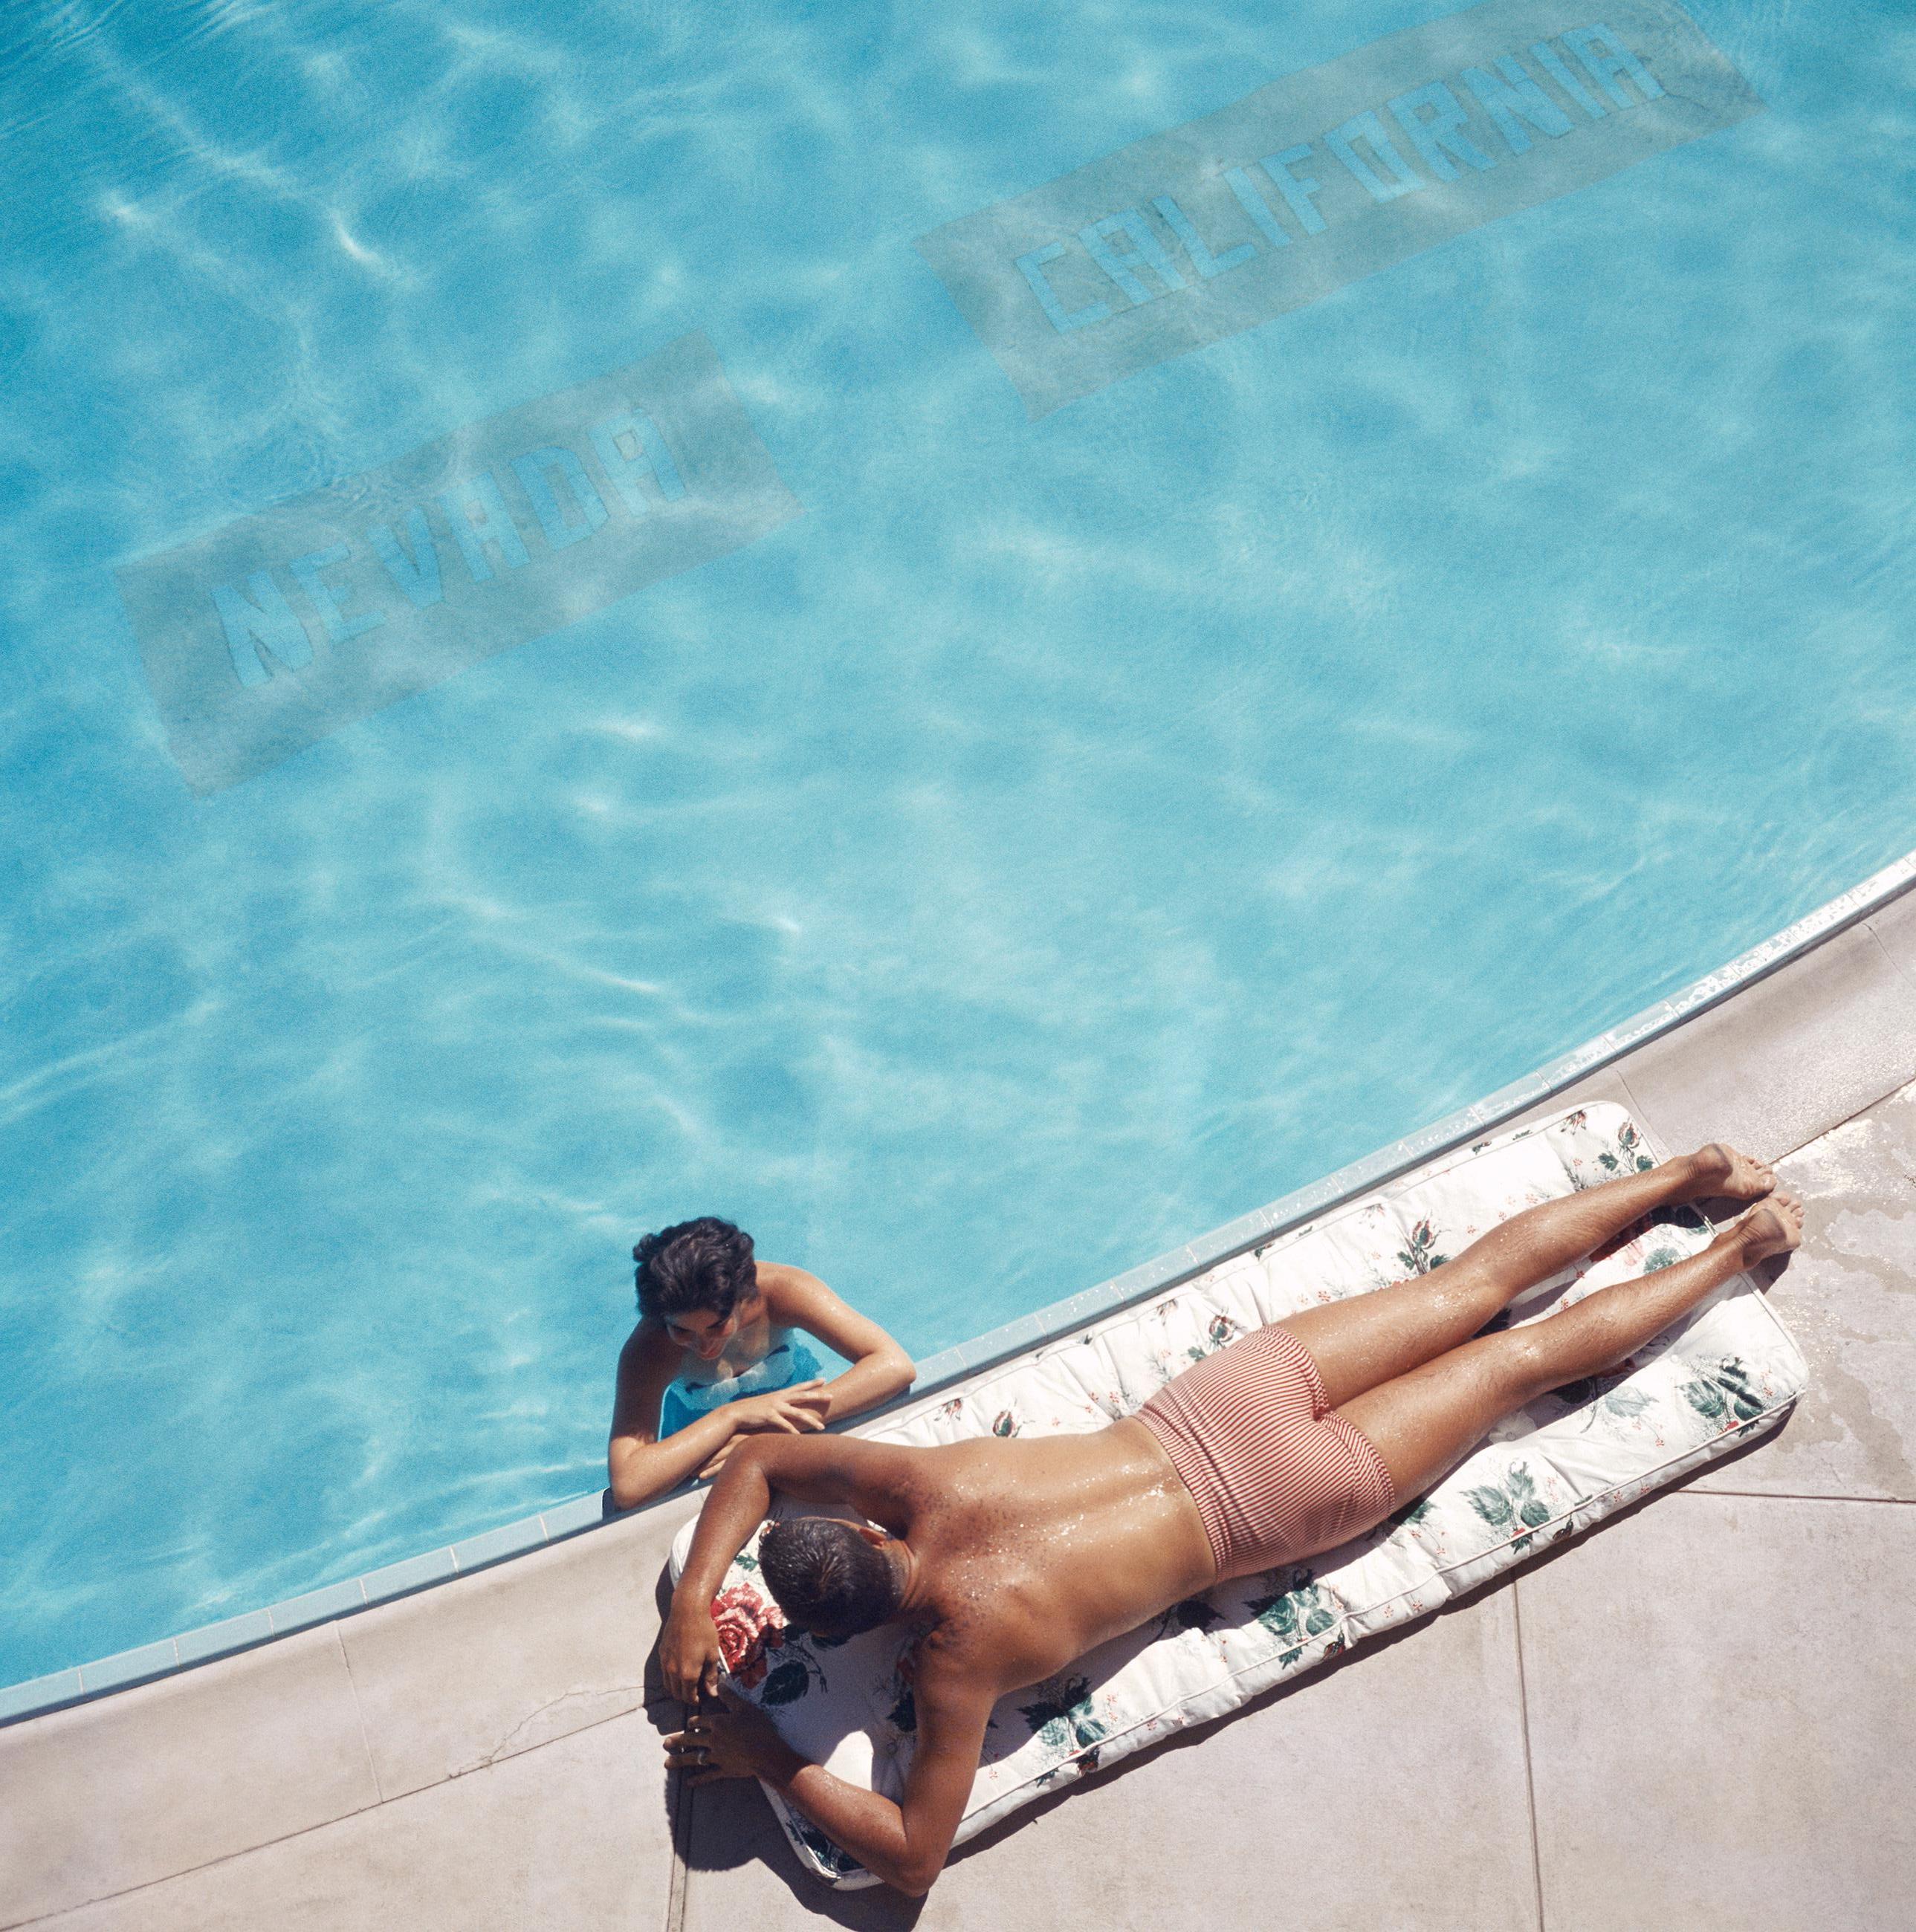 Lake Tahoe Couple
1959
C print
Estate signature stamped and hand numbered edition of 150 with certificate of authenticity from the estate. 

A couple at a swimming pool near Lake Tahoe, California, 1959. The line on the bottom of the pool marks the